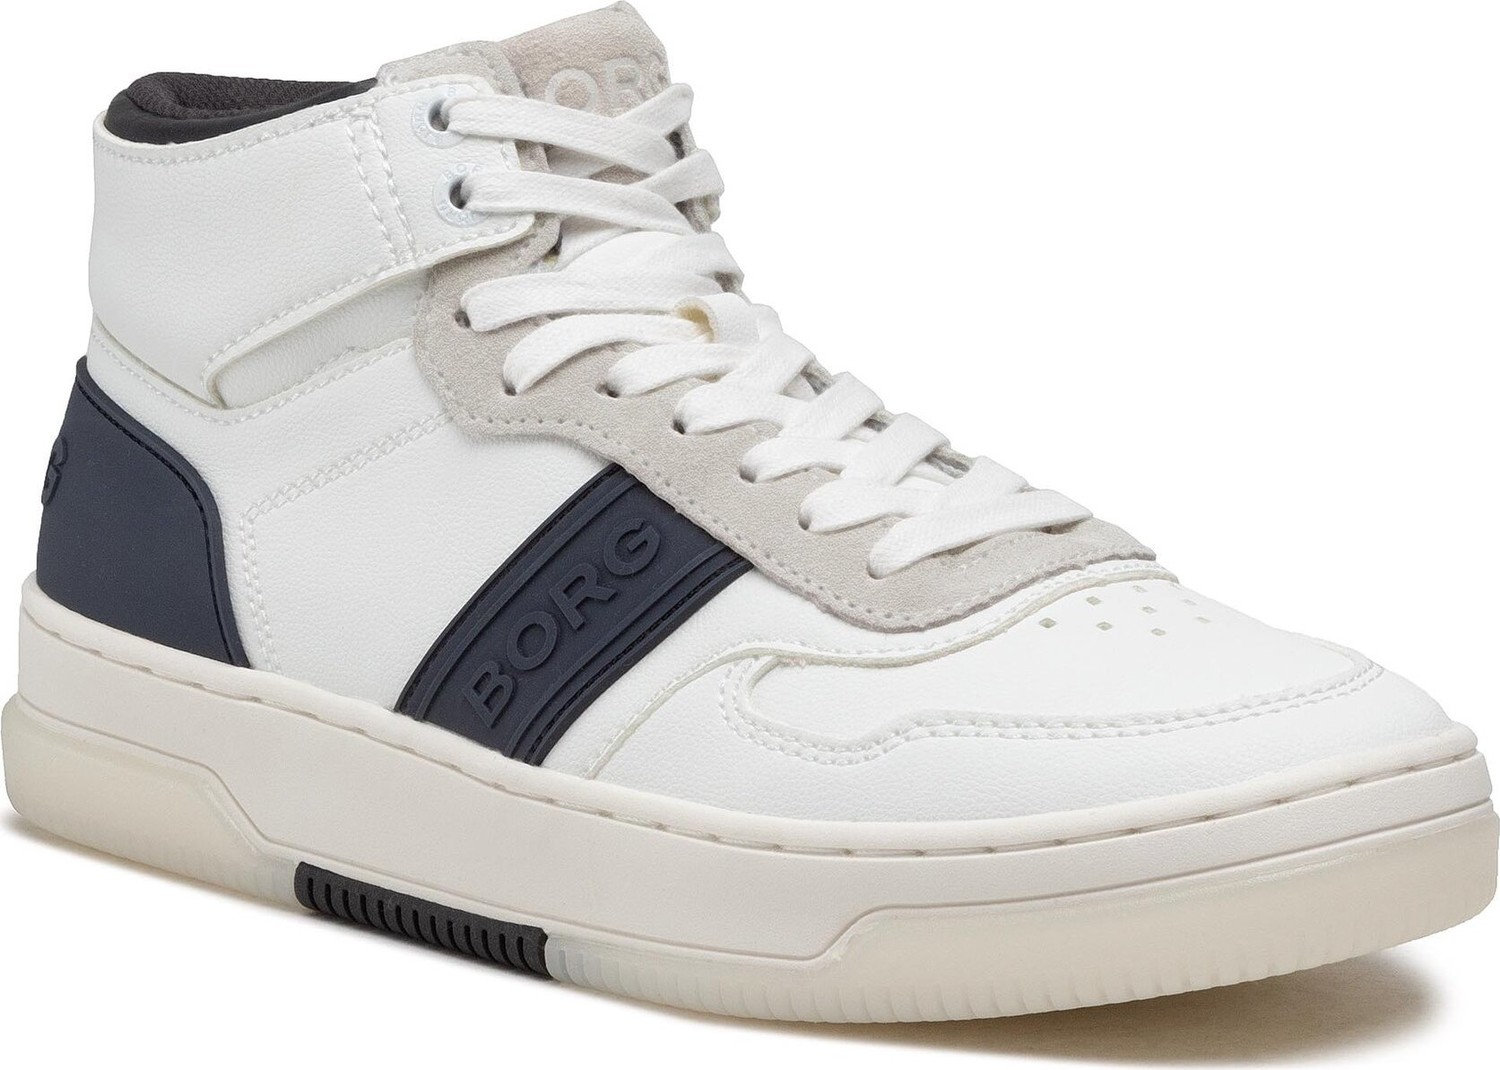 Sneakersy Björn Borg T2300 2242 635709 Wht/Nvy 1973